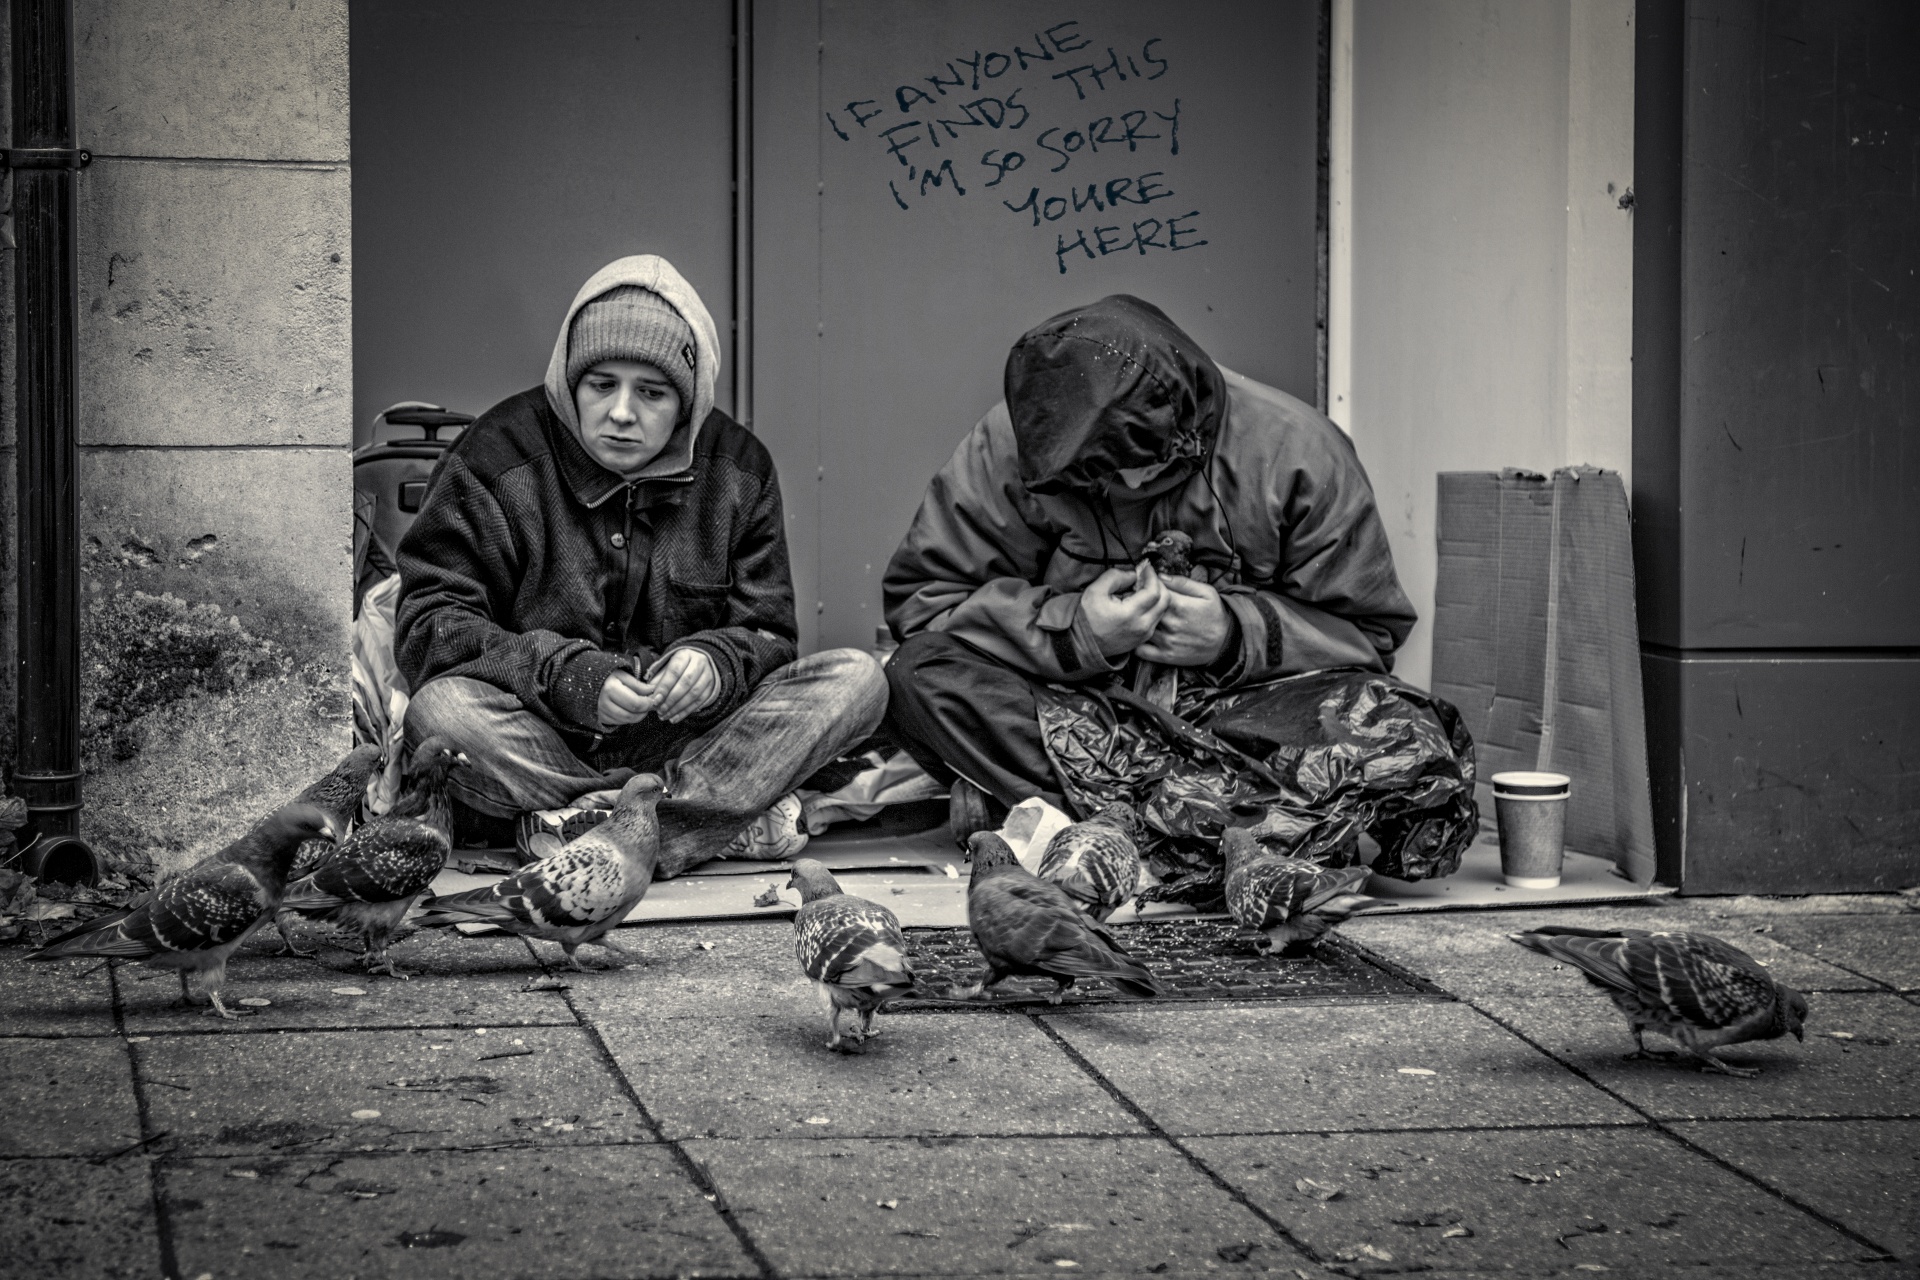 homelessness poverty begging - social issue free photo